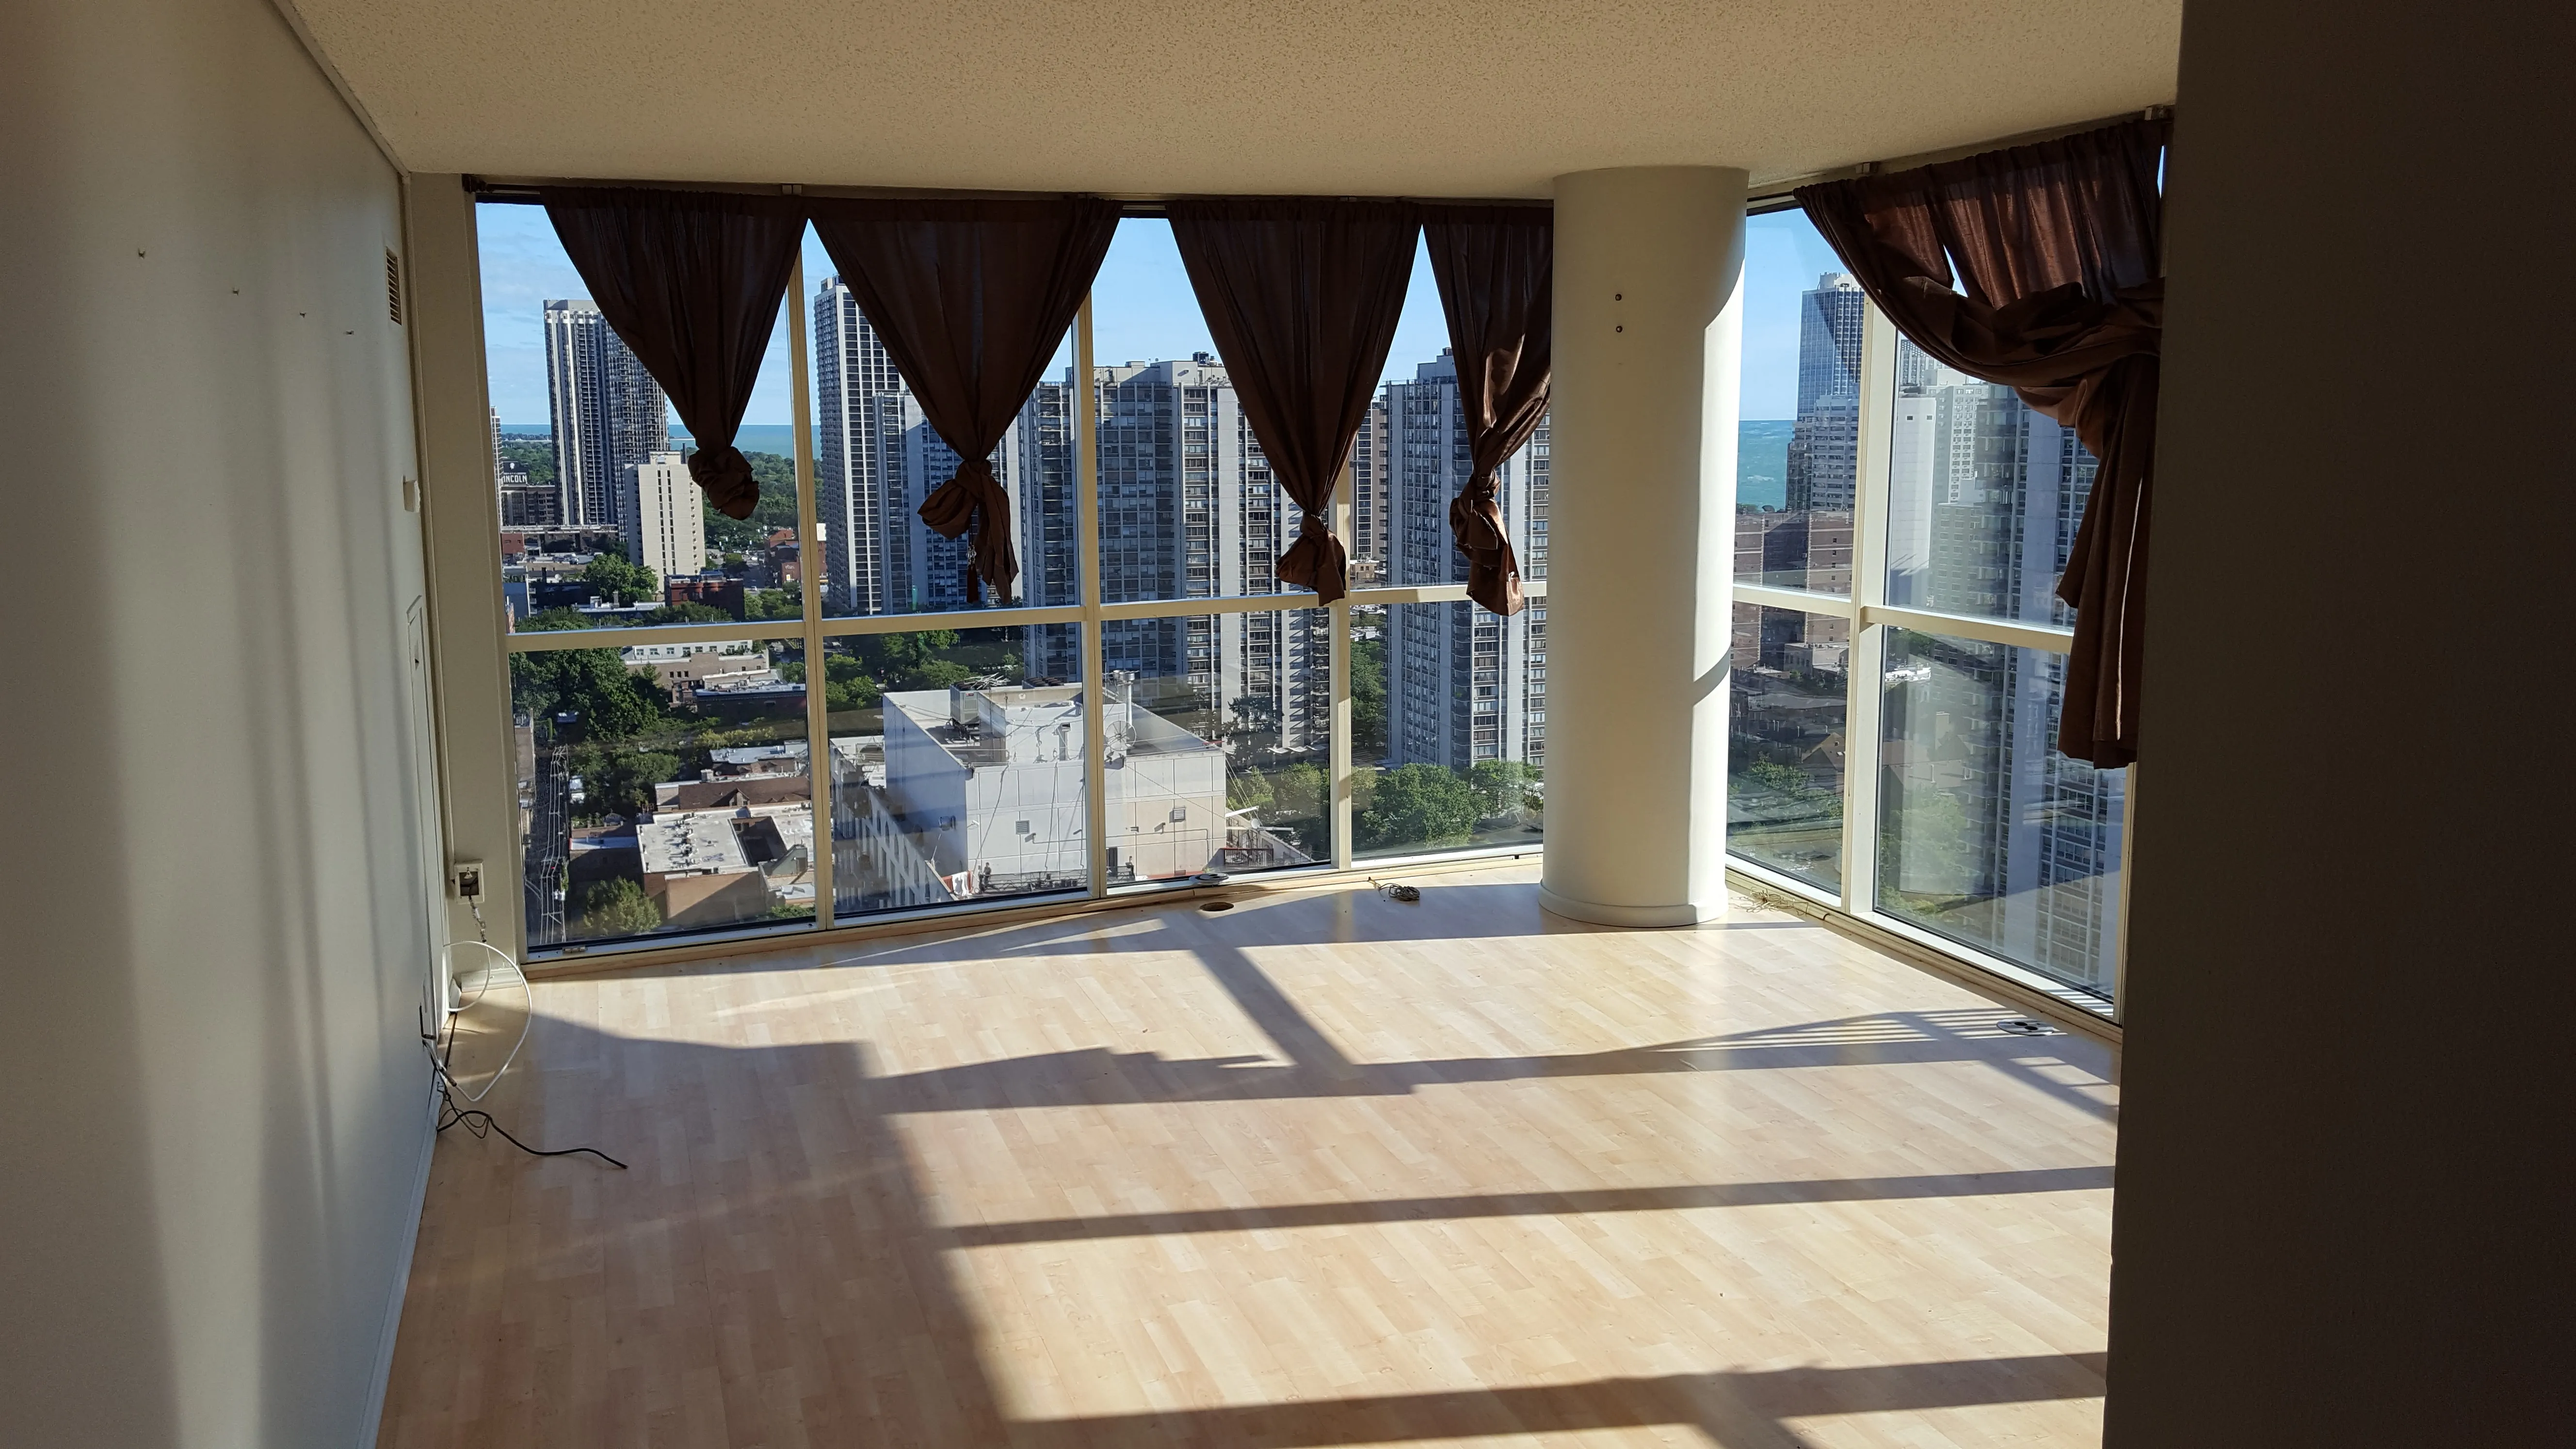 1212 N LASALLE ST 60610-LaSalle Private Residences-unit#02602-Chicago-IL